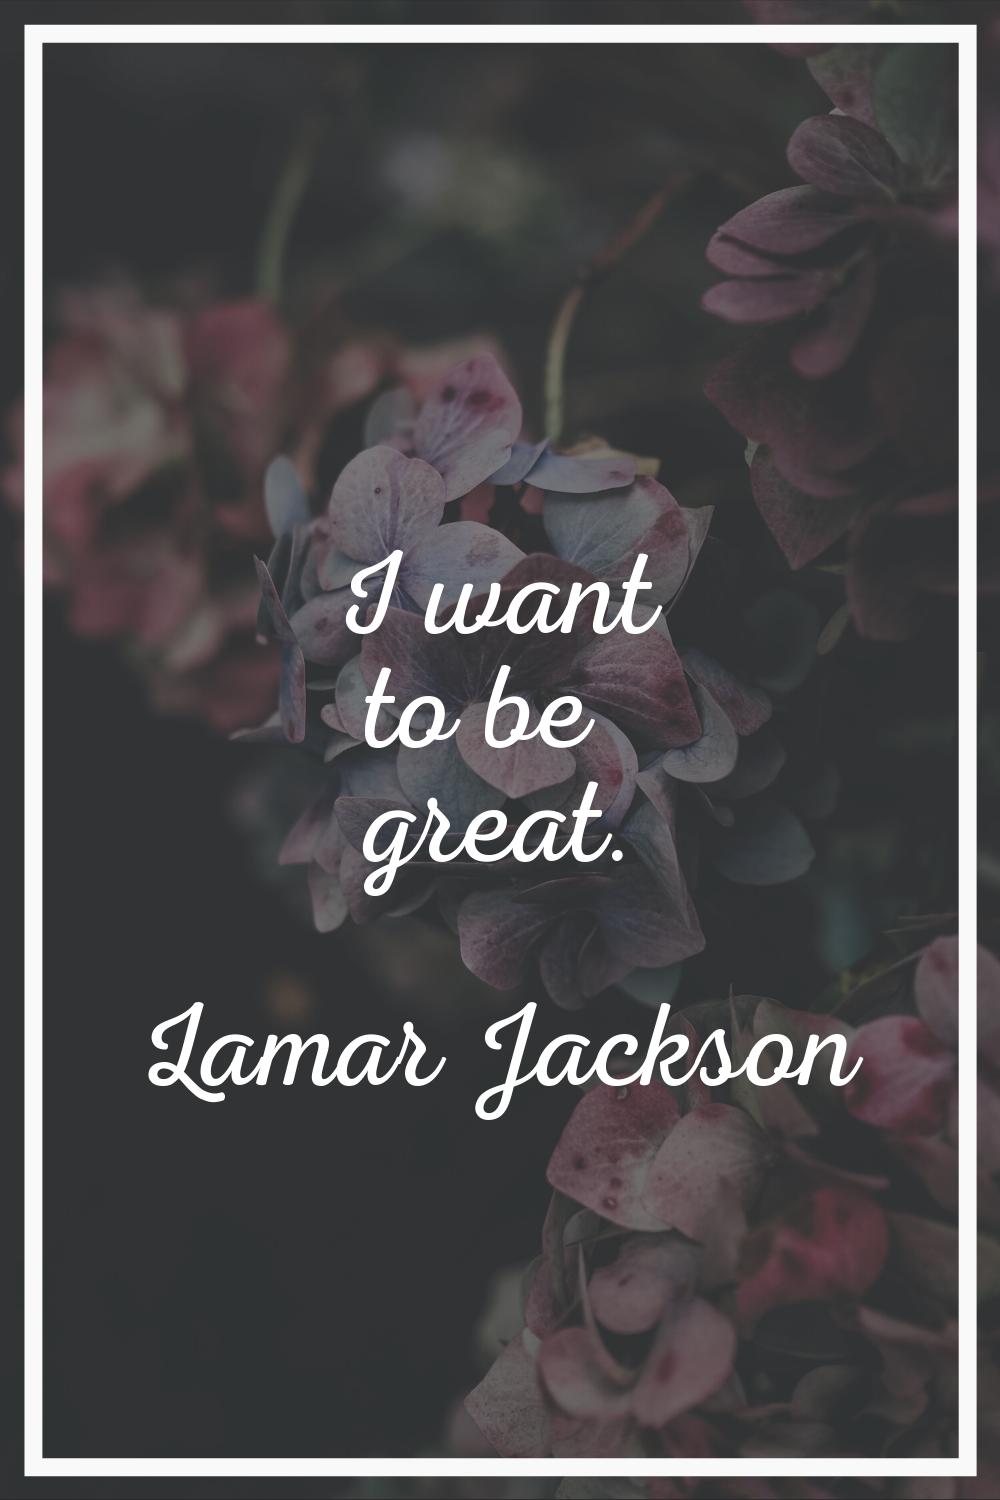 I want to be great.